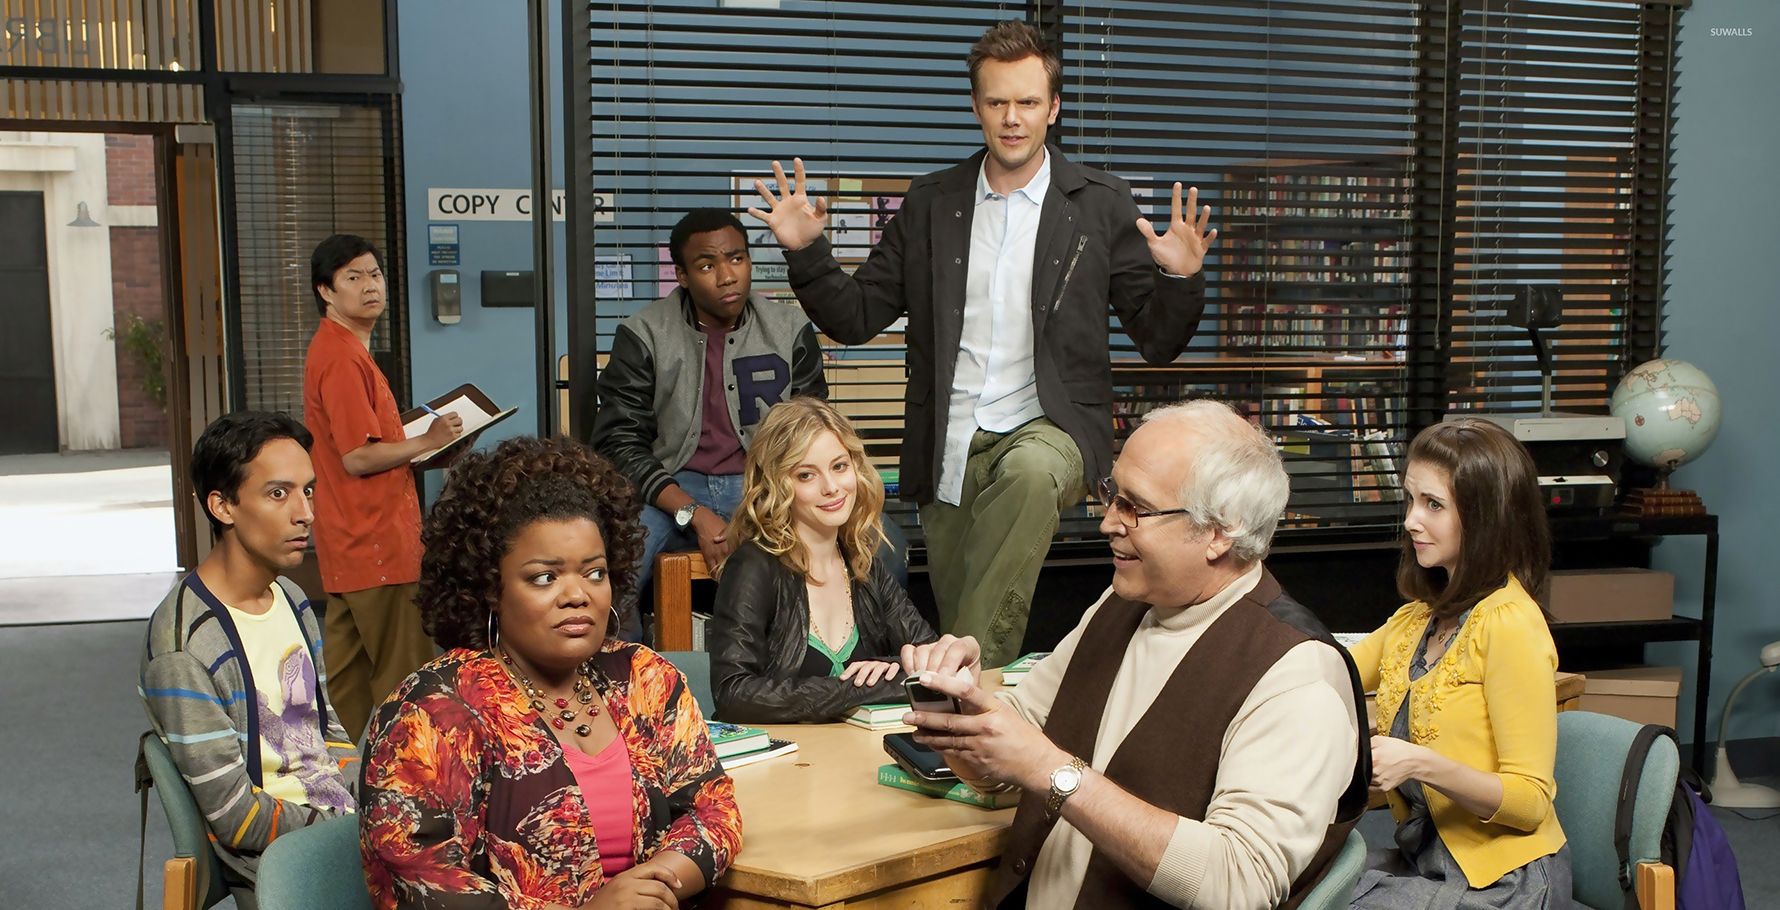 5 Reasons Community's MeowMeowBeenz Episode was Awesome